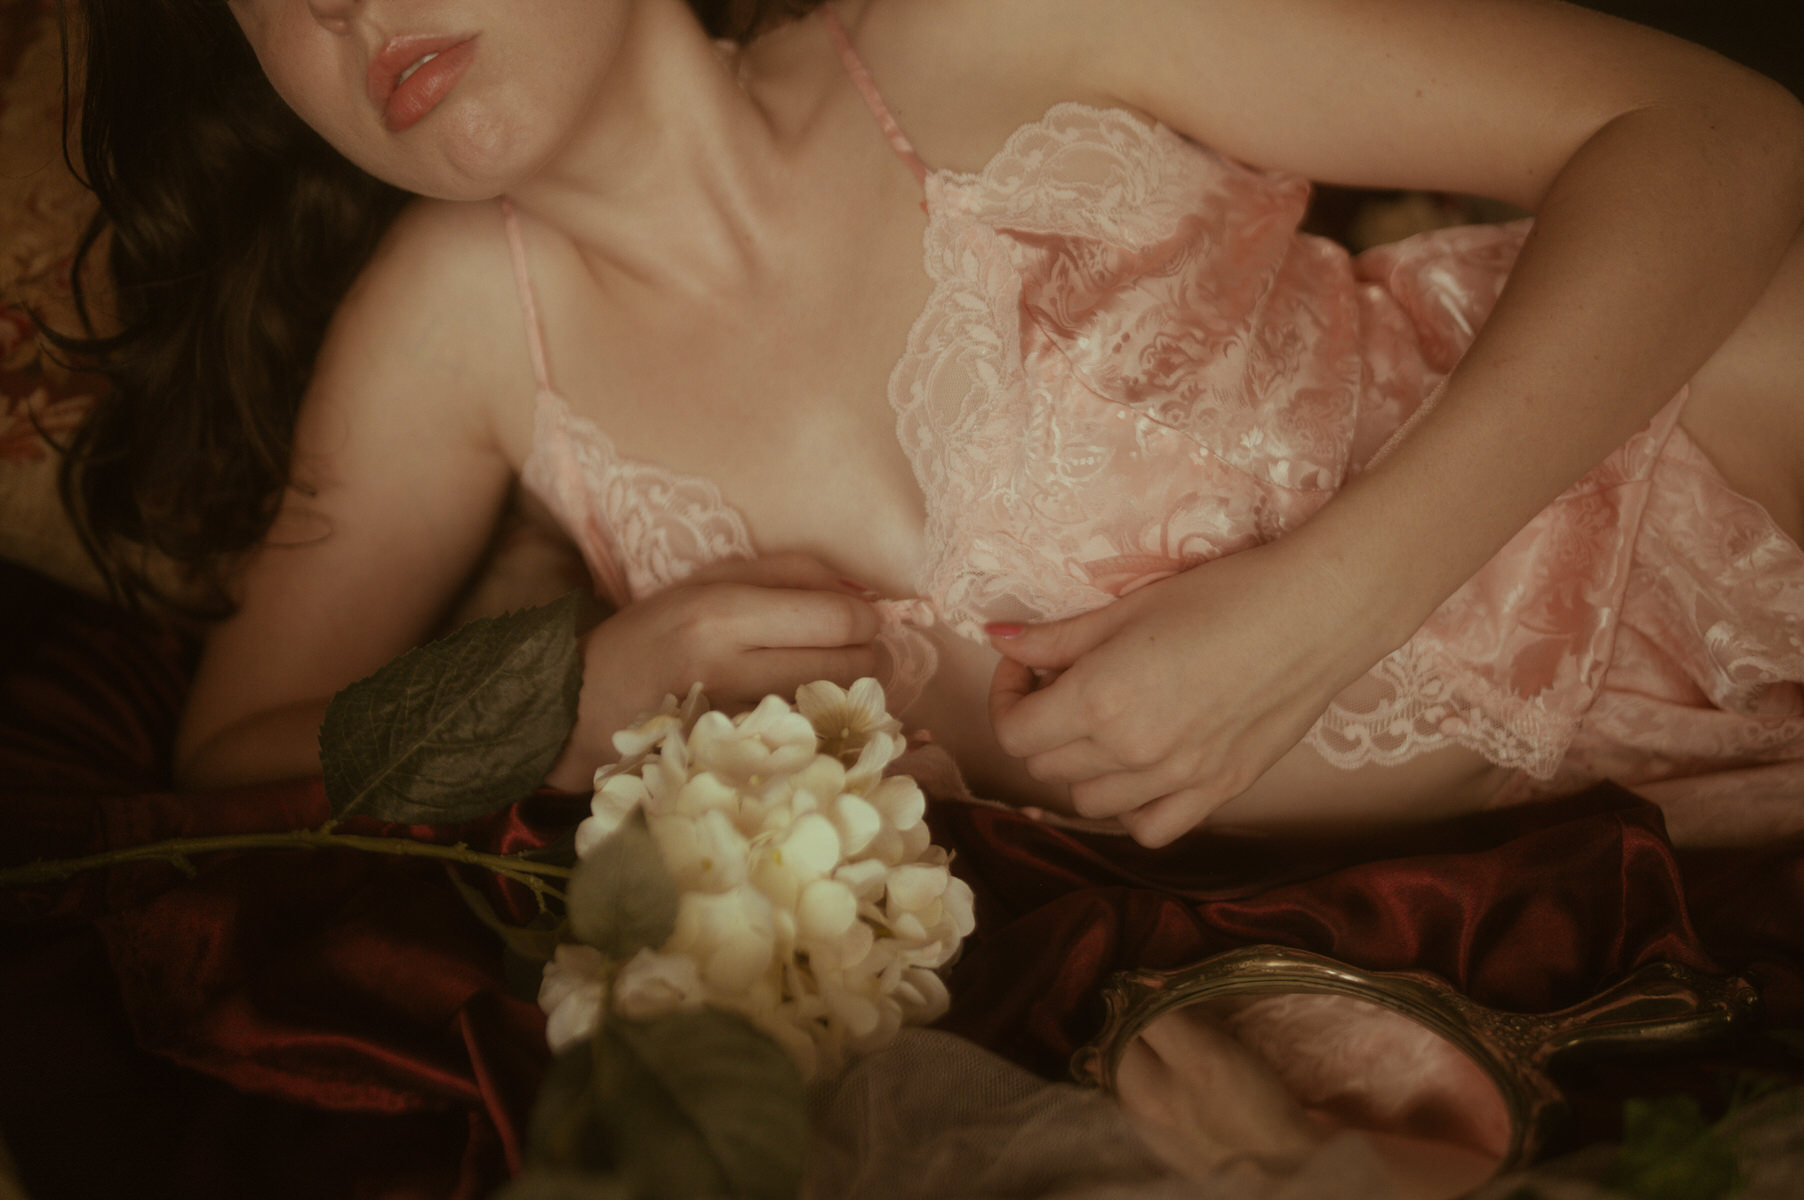 Dallas Boudoir Photography: Pink lingerie-clad woman on a bed surrounded by flowers.